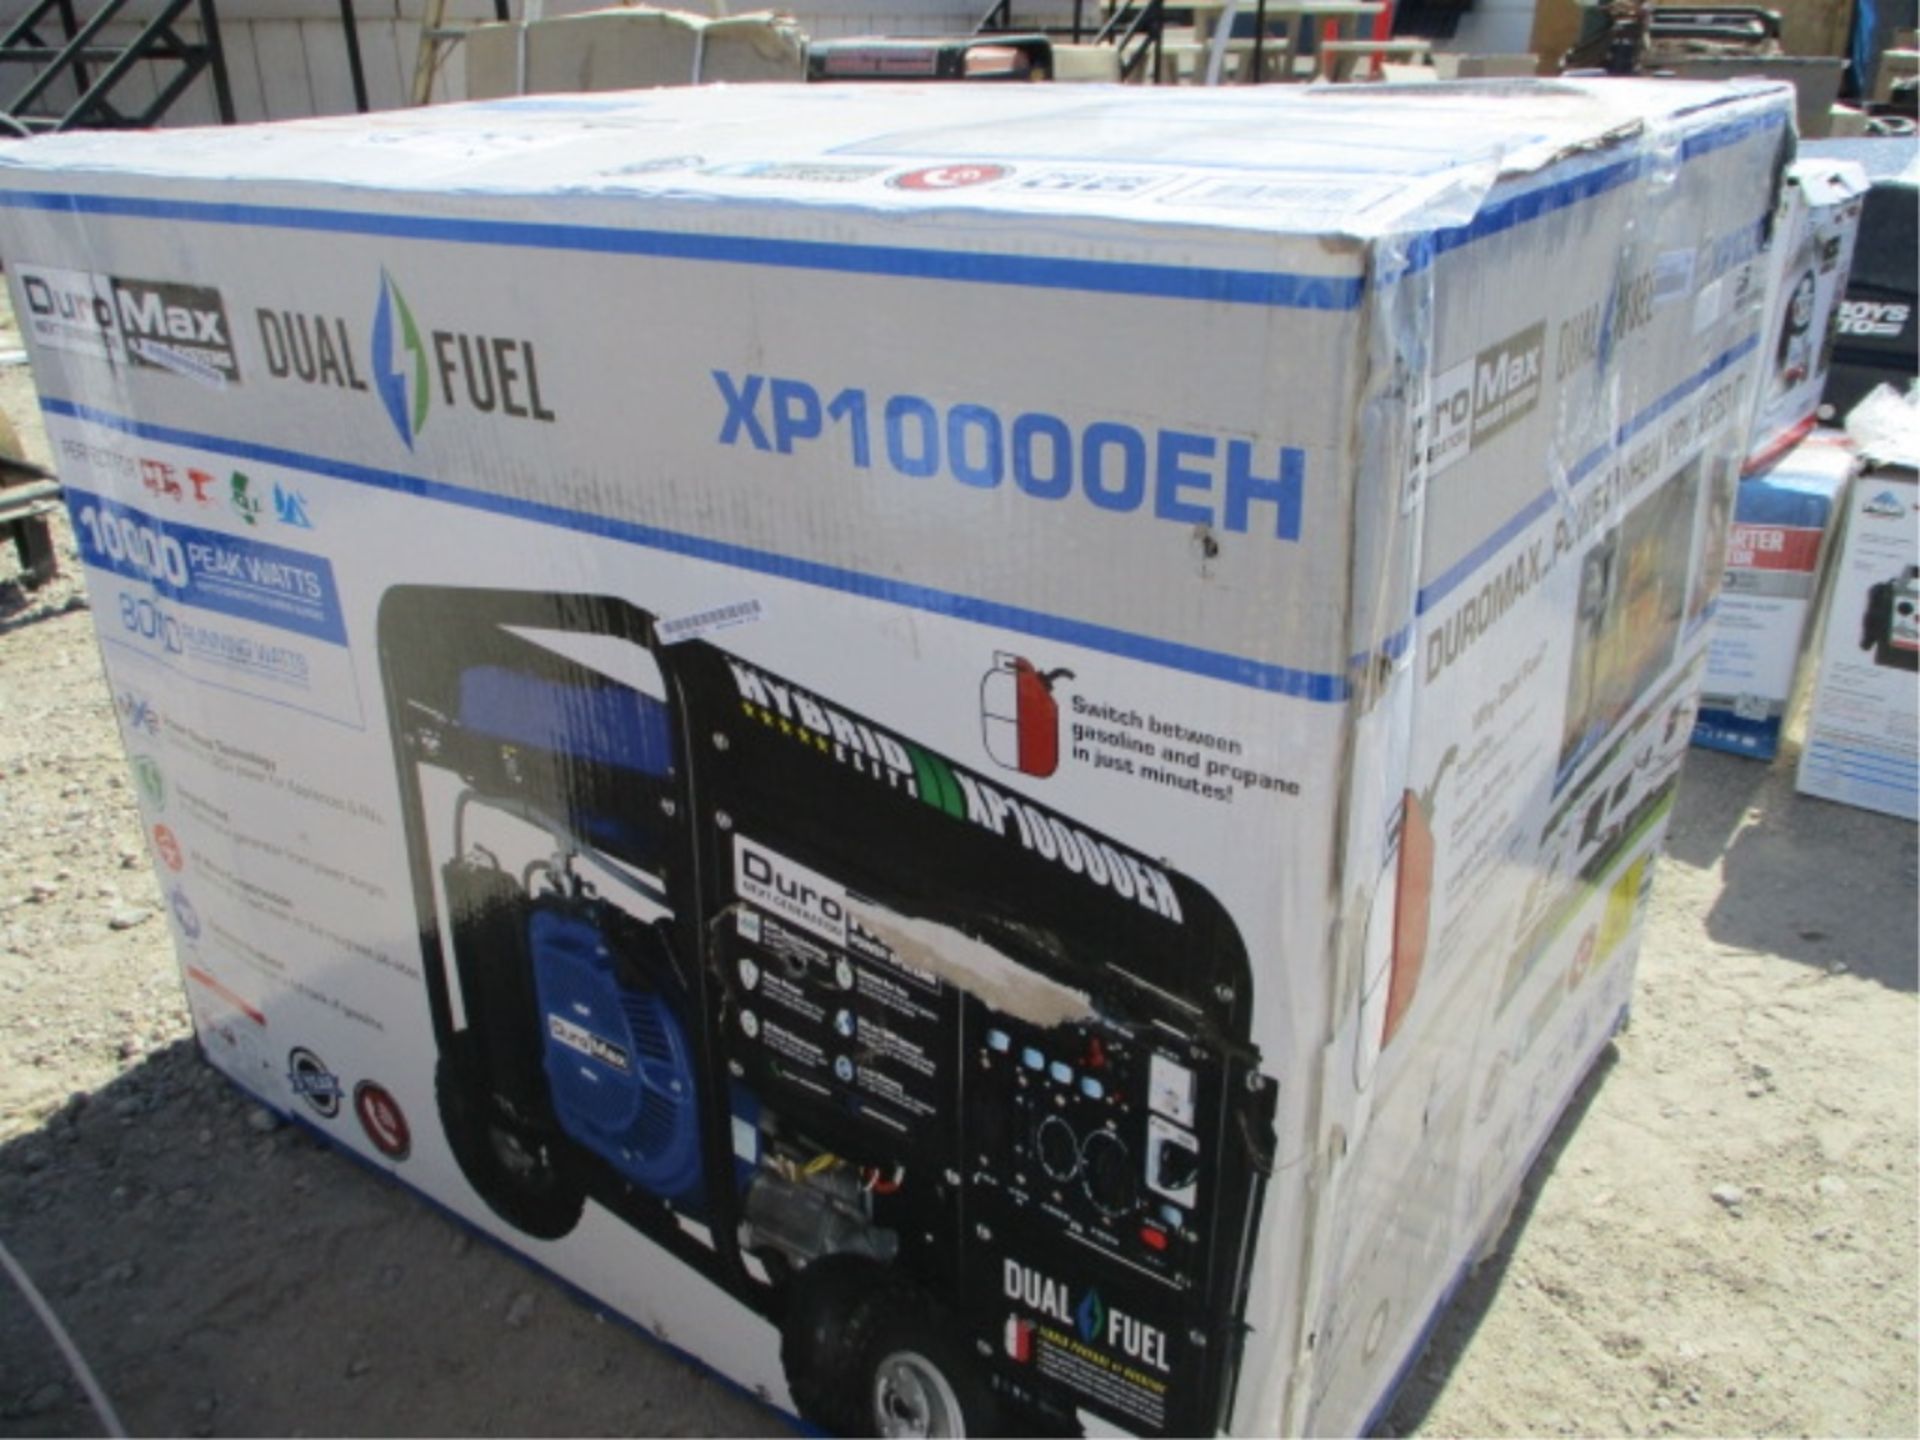 Duromax XP1000EH Dual Fuel Generator, 10,000 Watts - Image 4 of 8